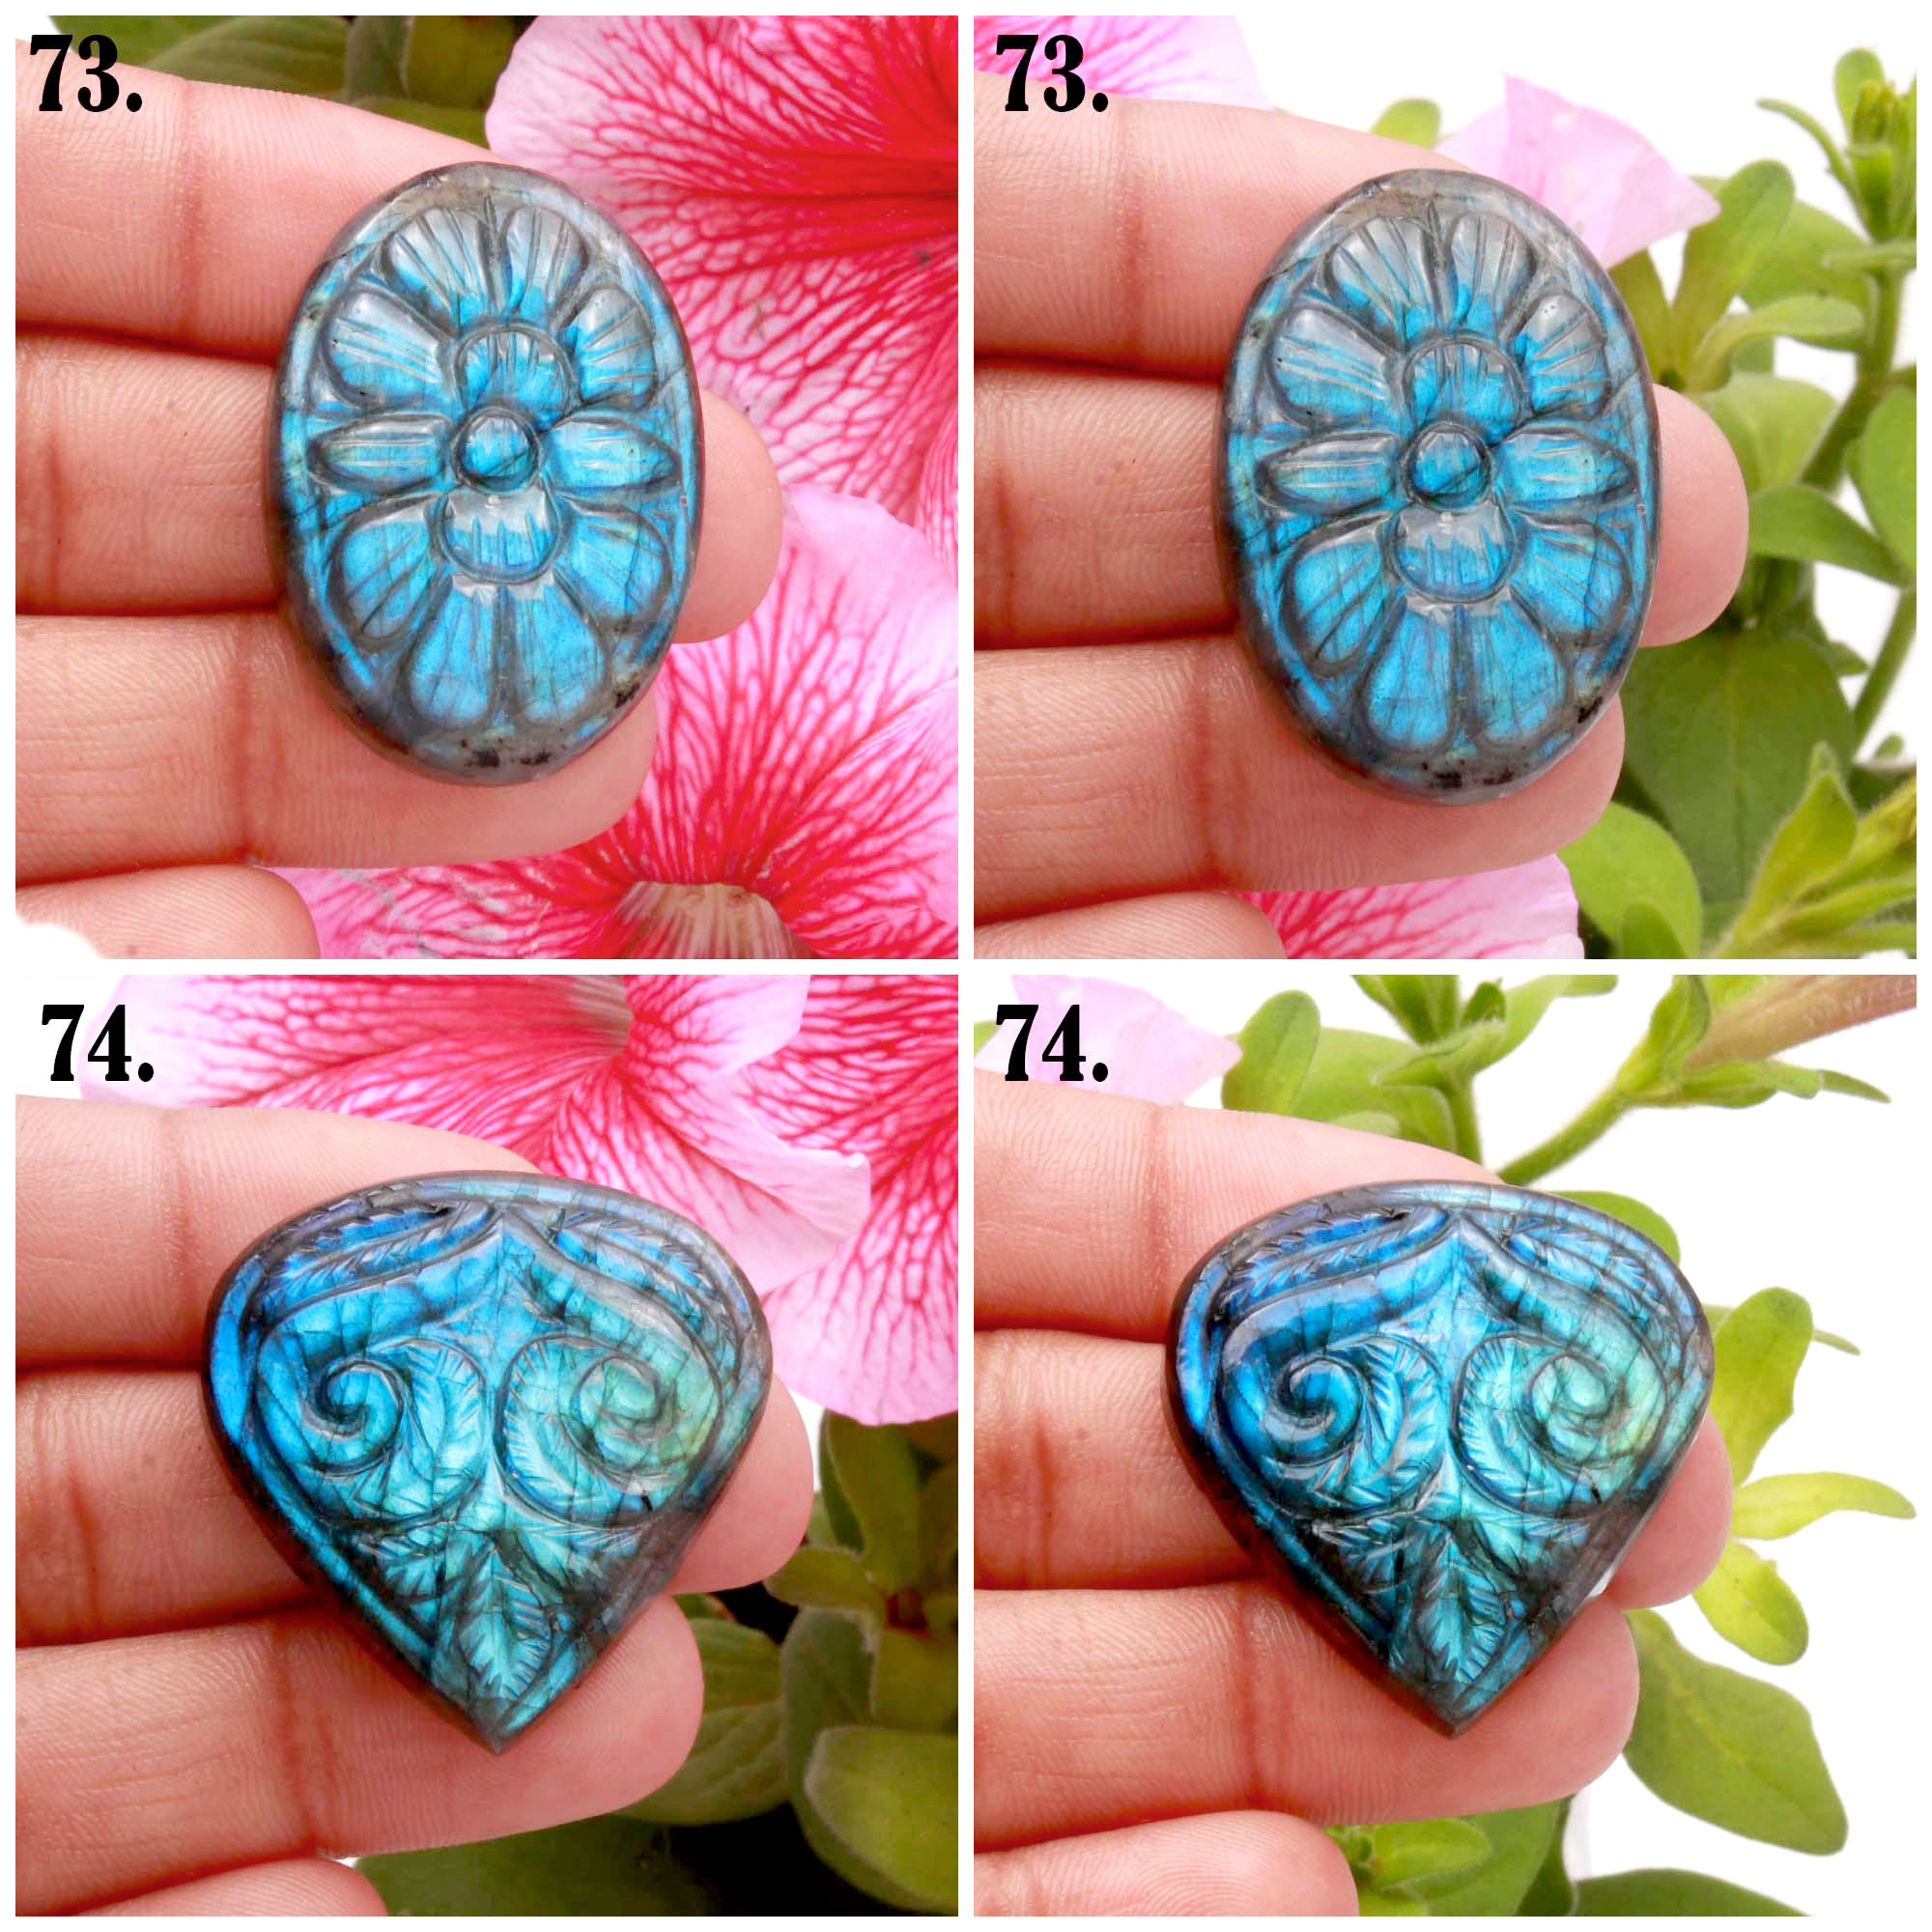 Blue Fire Labradorite Gemstone, Loose Gemstone Carving For Making Wire Pendant, Carving, Stone